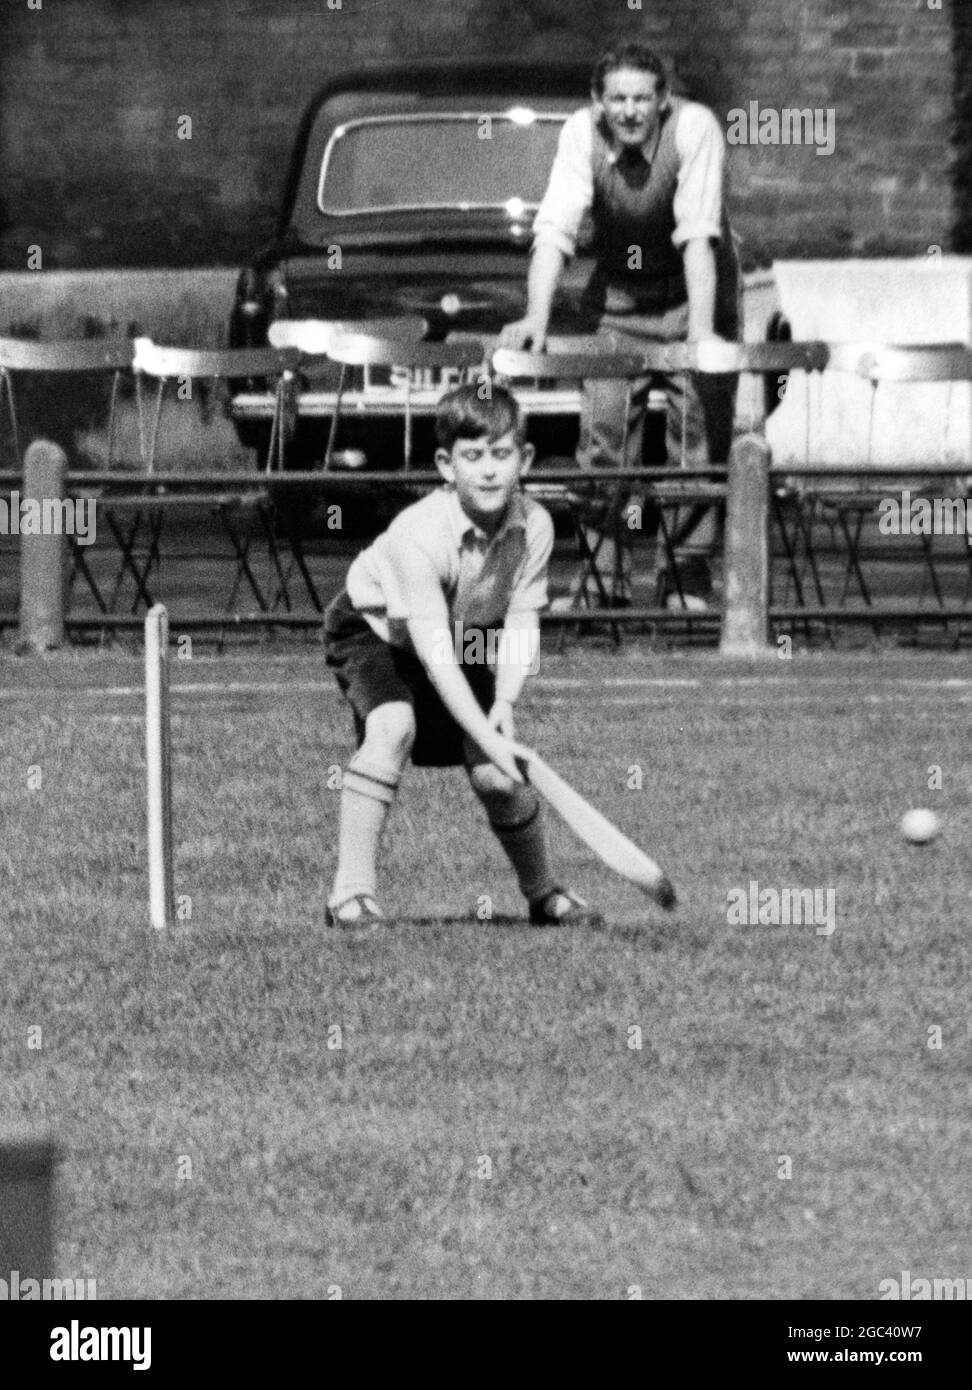 Prince Charles Batsman - cricket - playing with schoolmates on a games field near his Knightsbridge, London prep school on Wednesday. 1 May 1957 Stock Photo